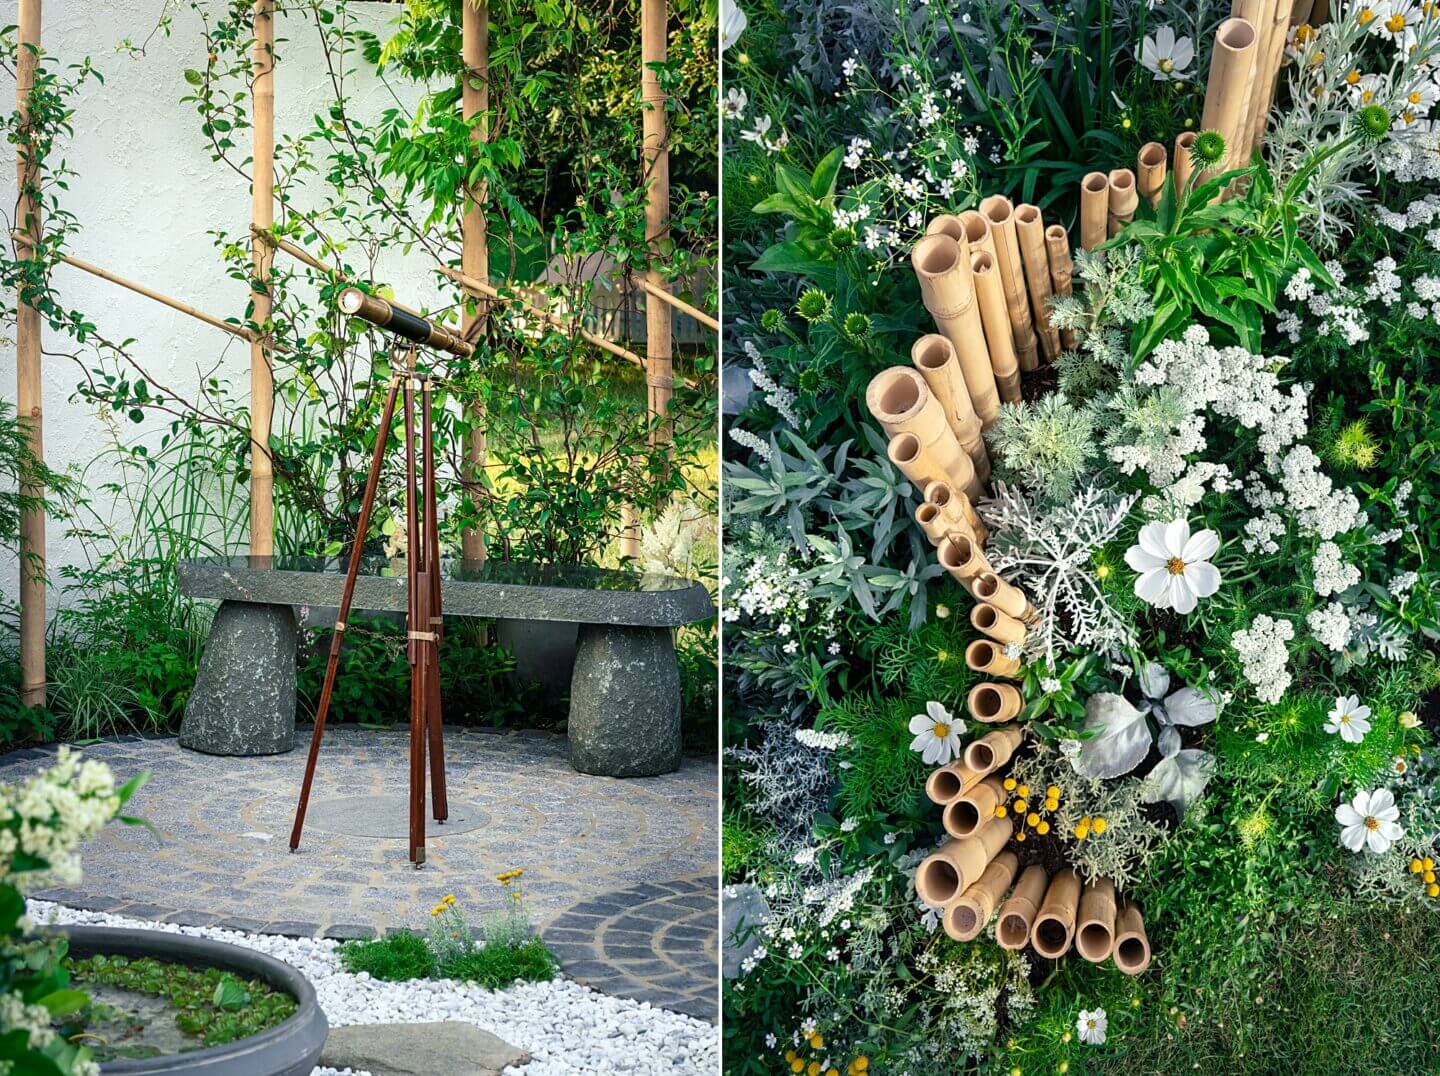 Milky Way pattern of bamboo poles and white Cosmos with telescope for Queenie Chan's Lunar Garden